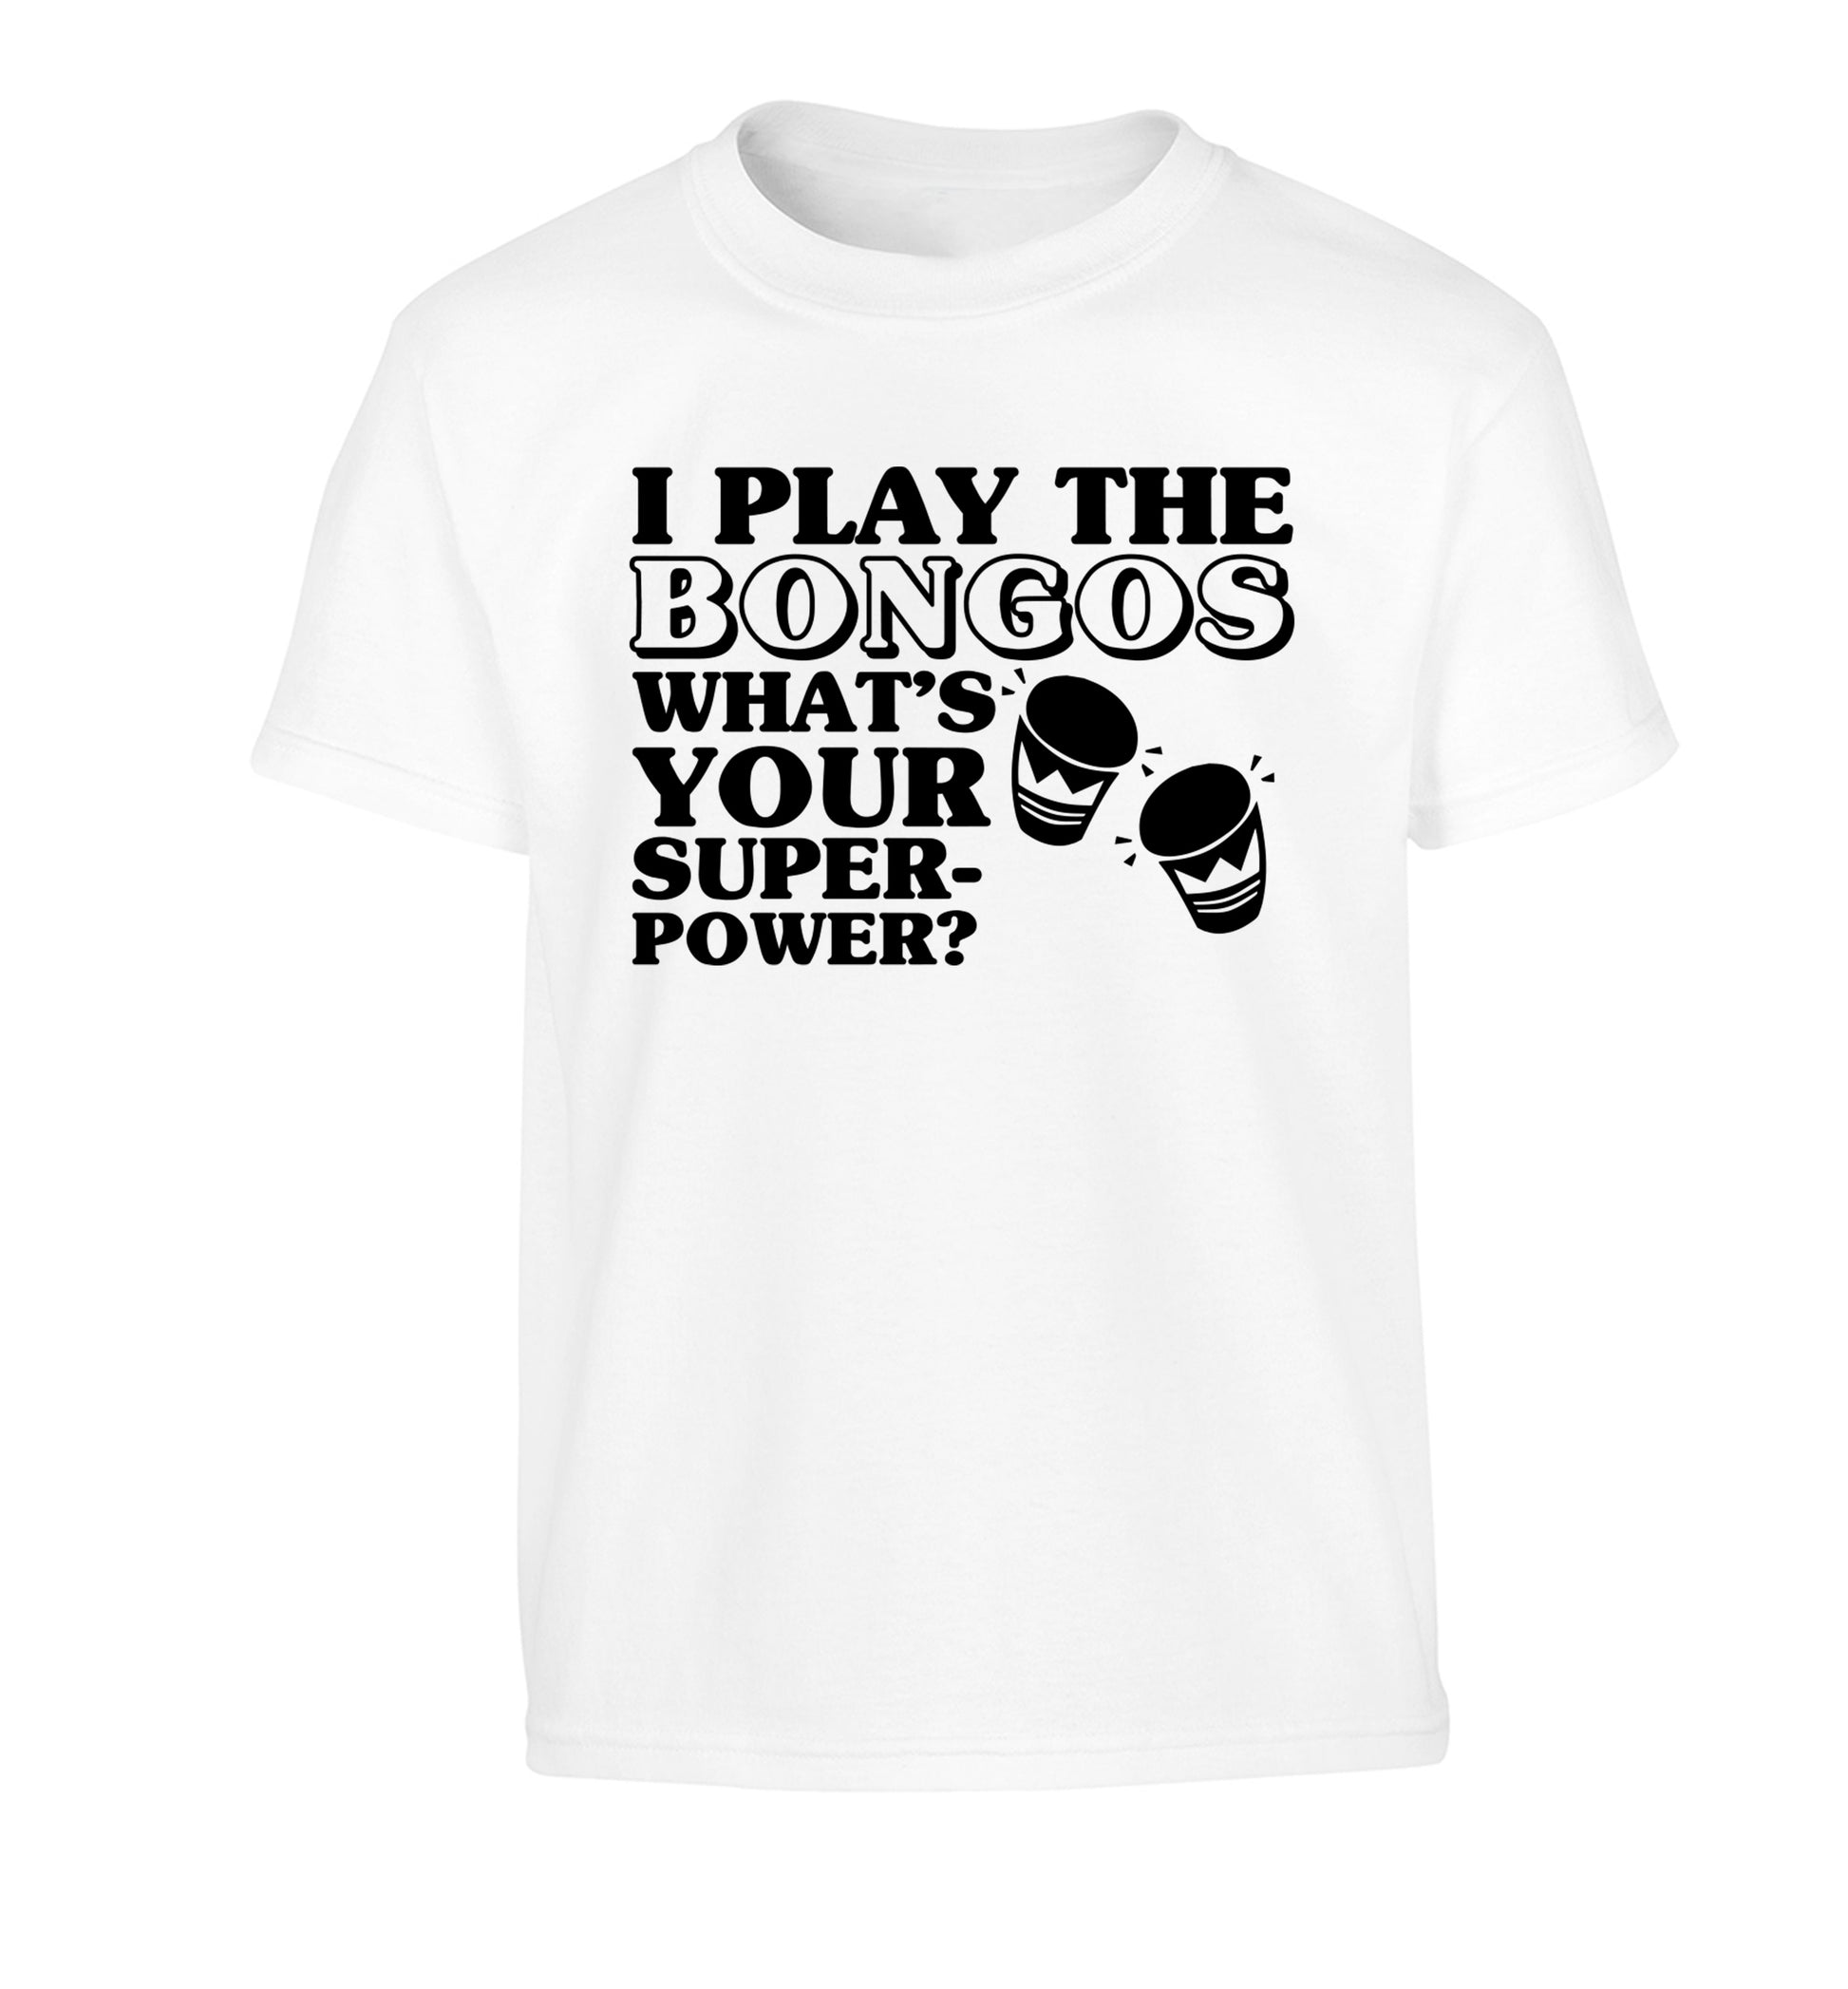 I play the bongos what's your superpower? Children's white Tshirt 12-14 Years